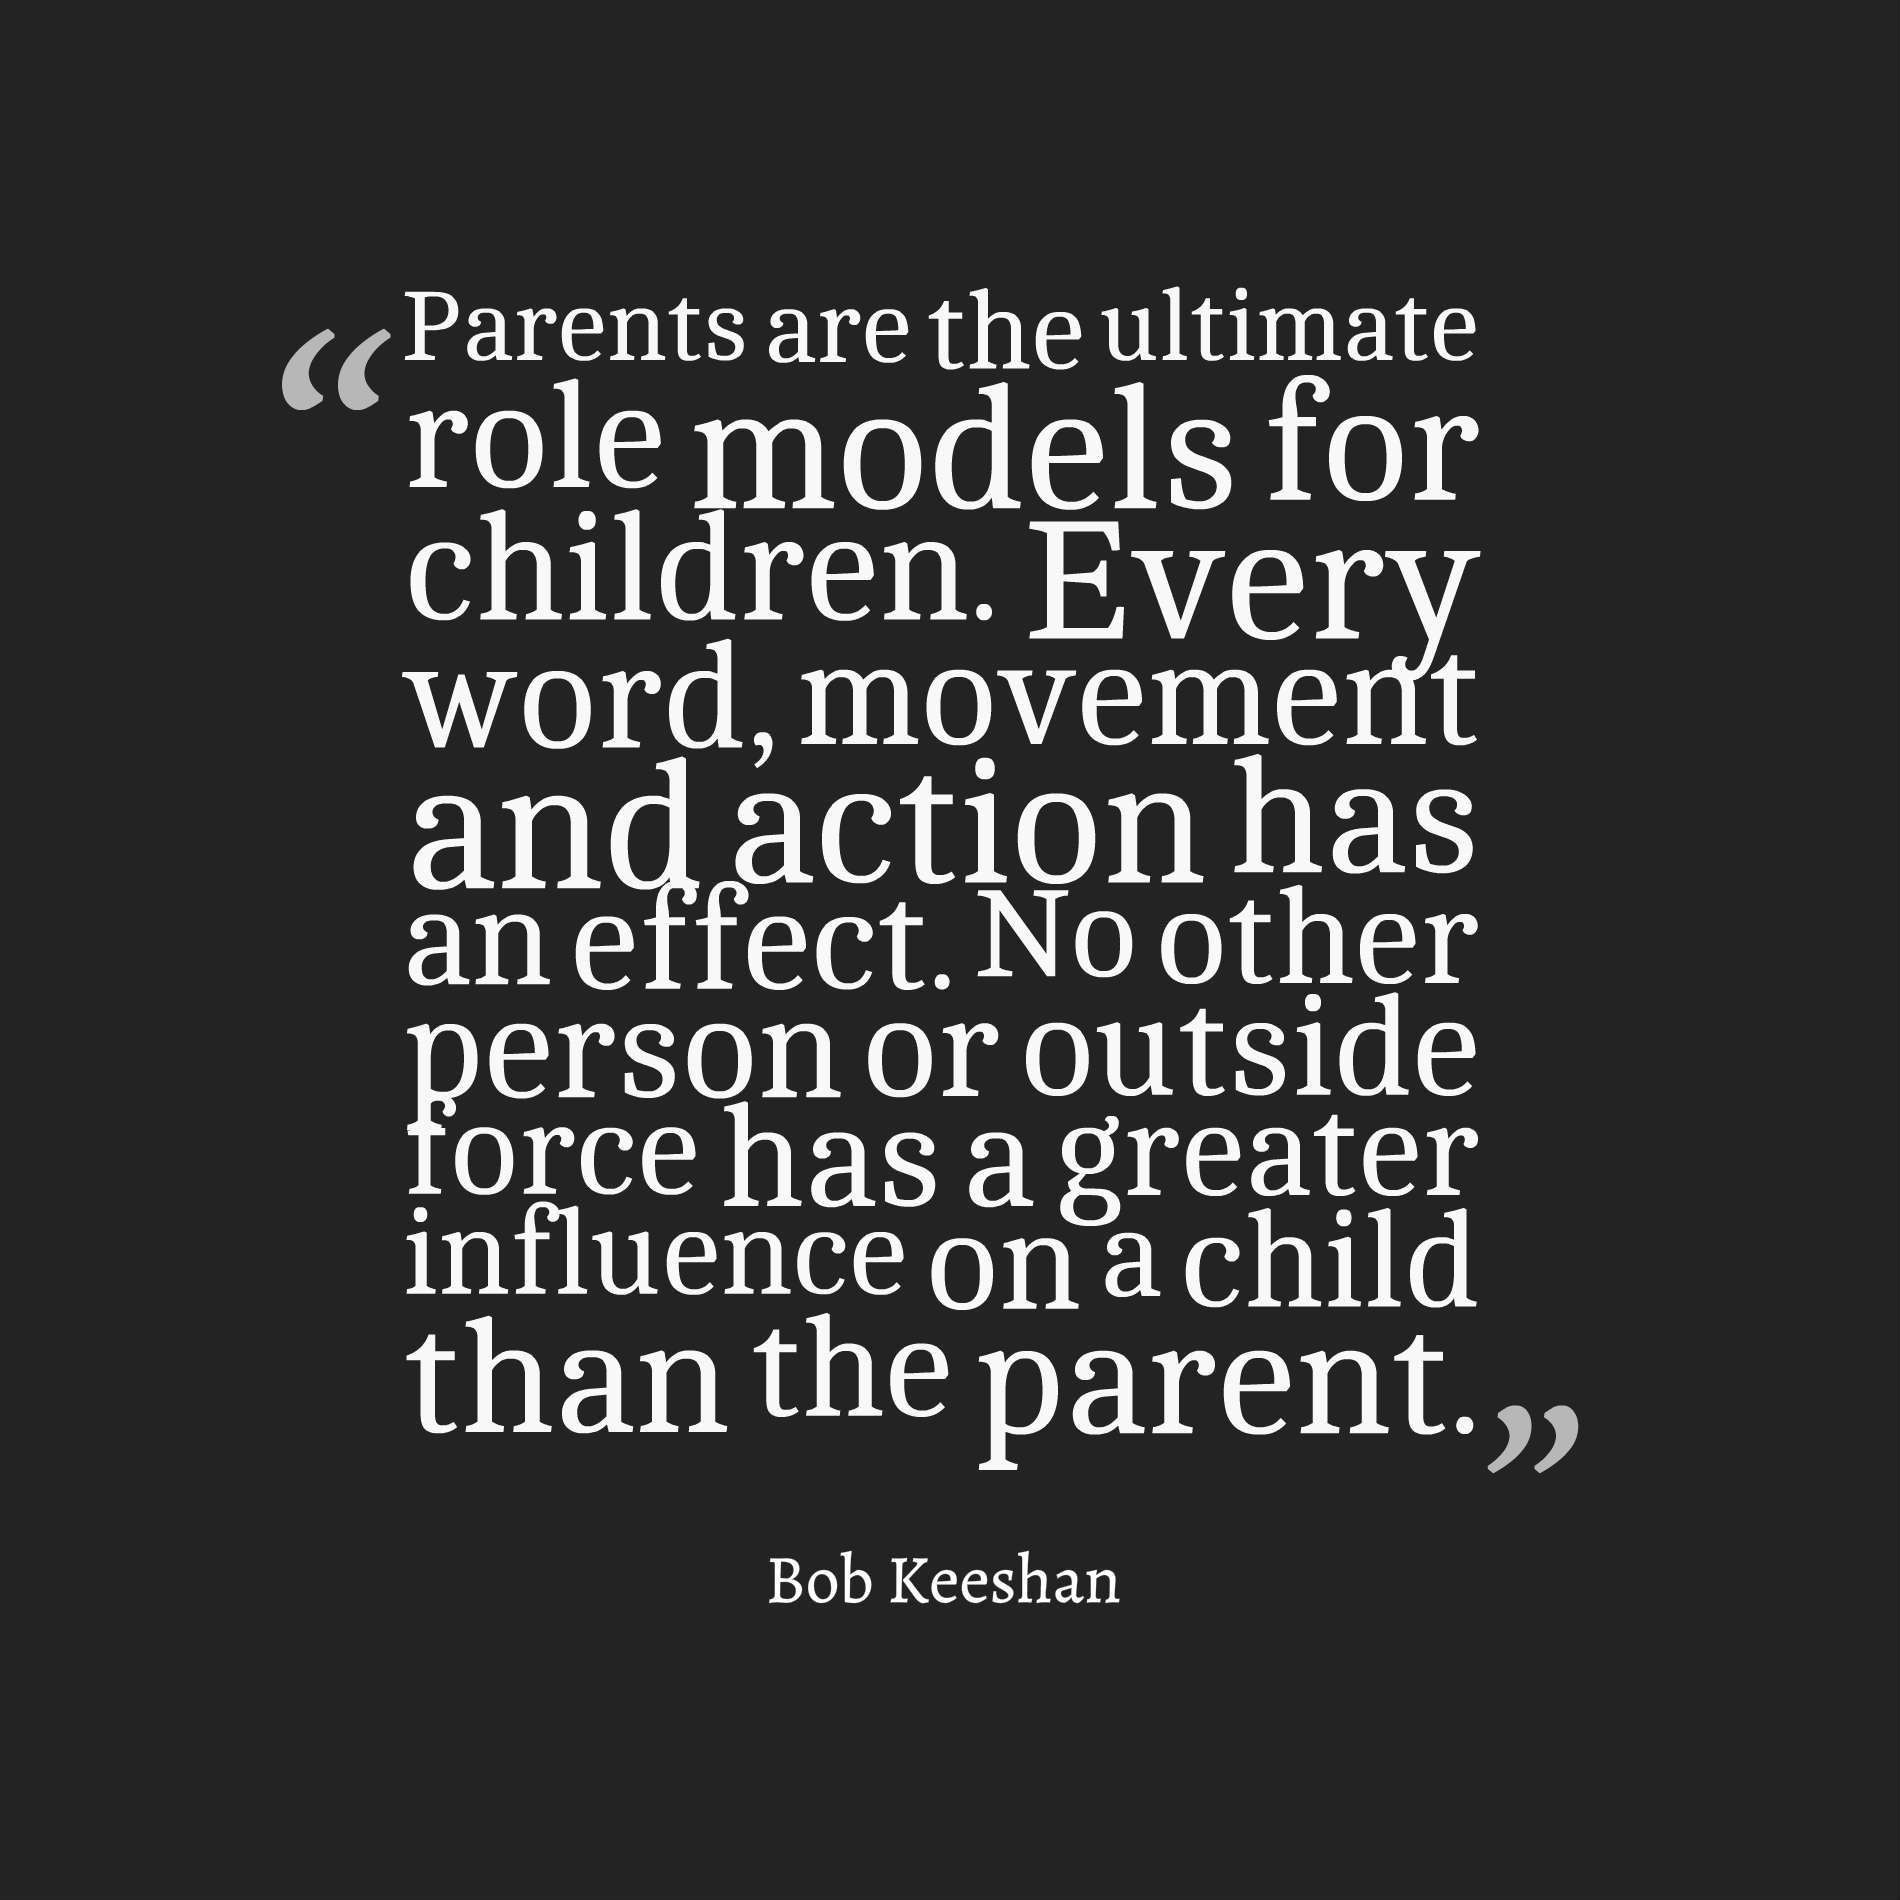 parents are the ultimate role models for children. every word, movement and action has an effect. no other person or outside force has a greater influence on a child than the parent.